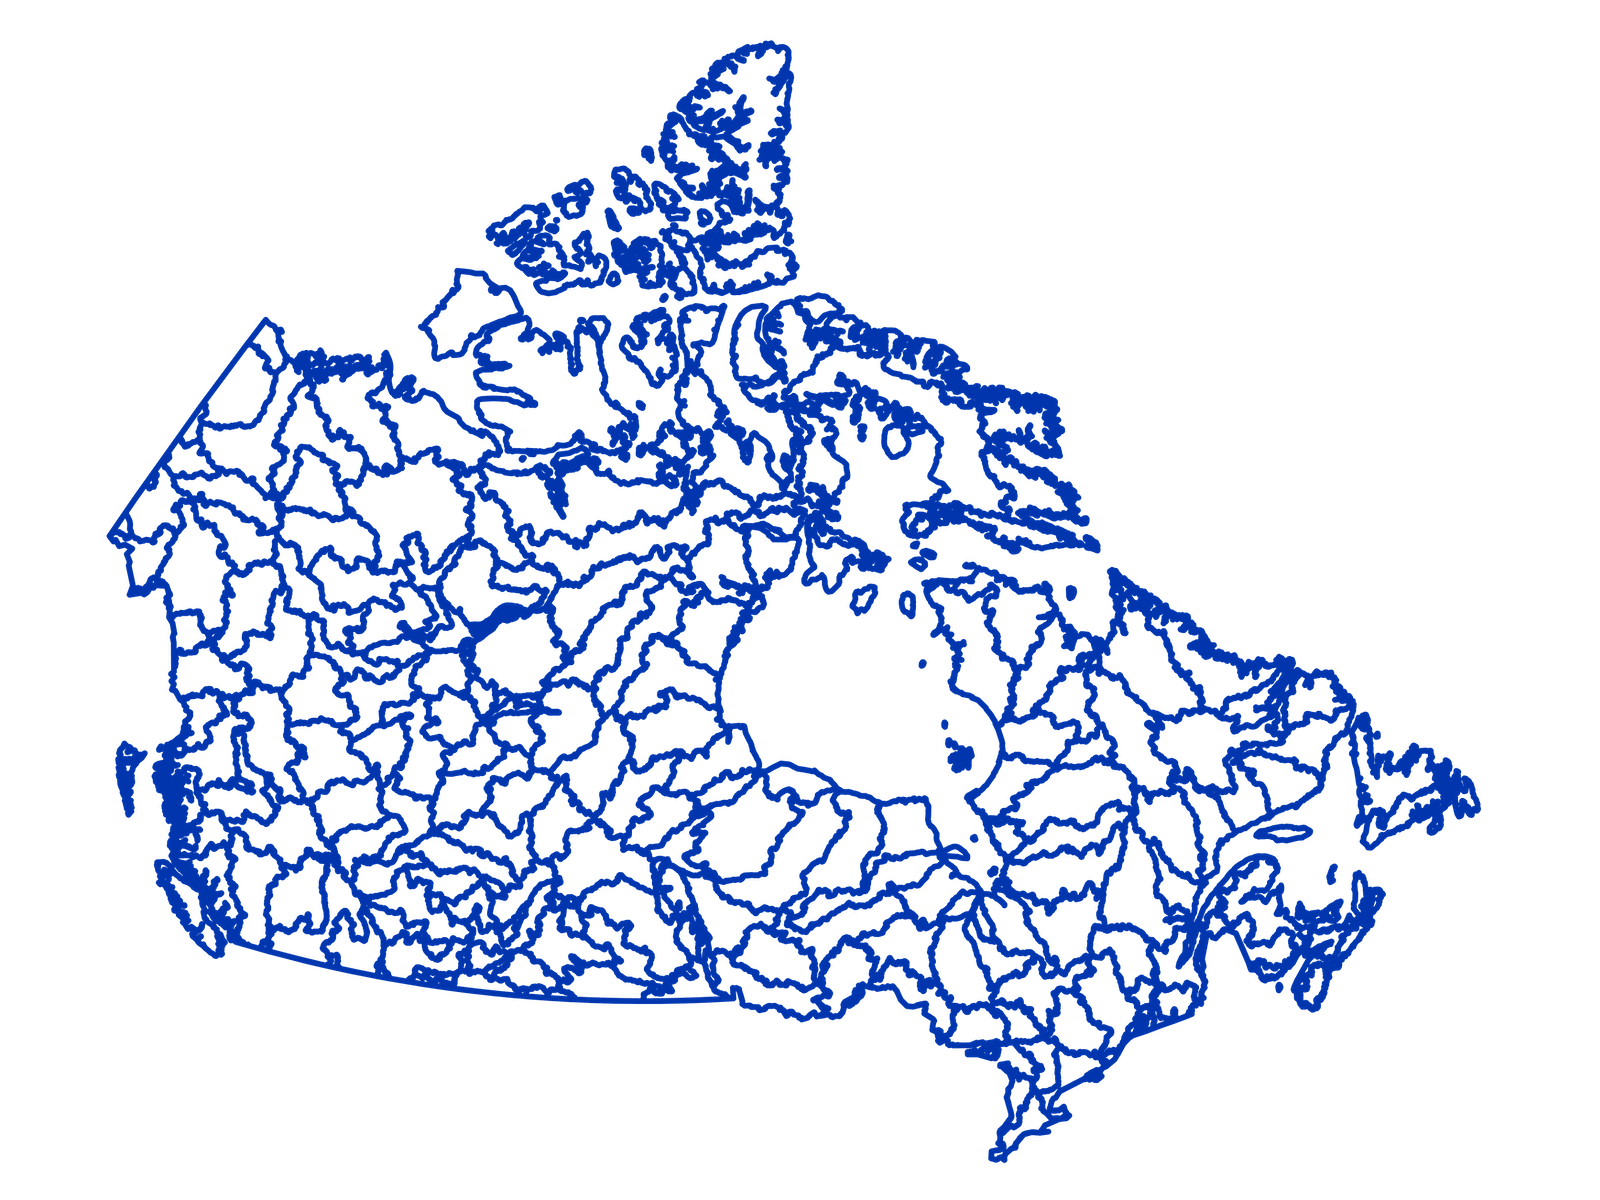 Blue sketch of a map of Canada showing watershed contours.